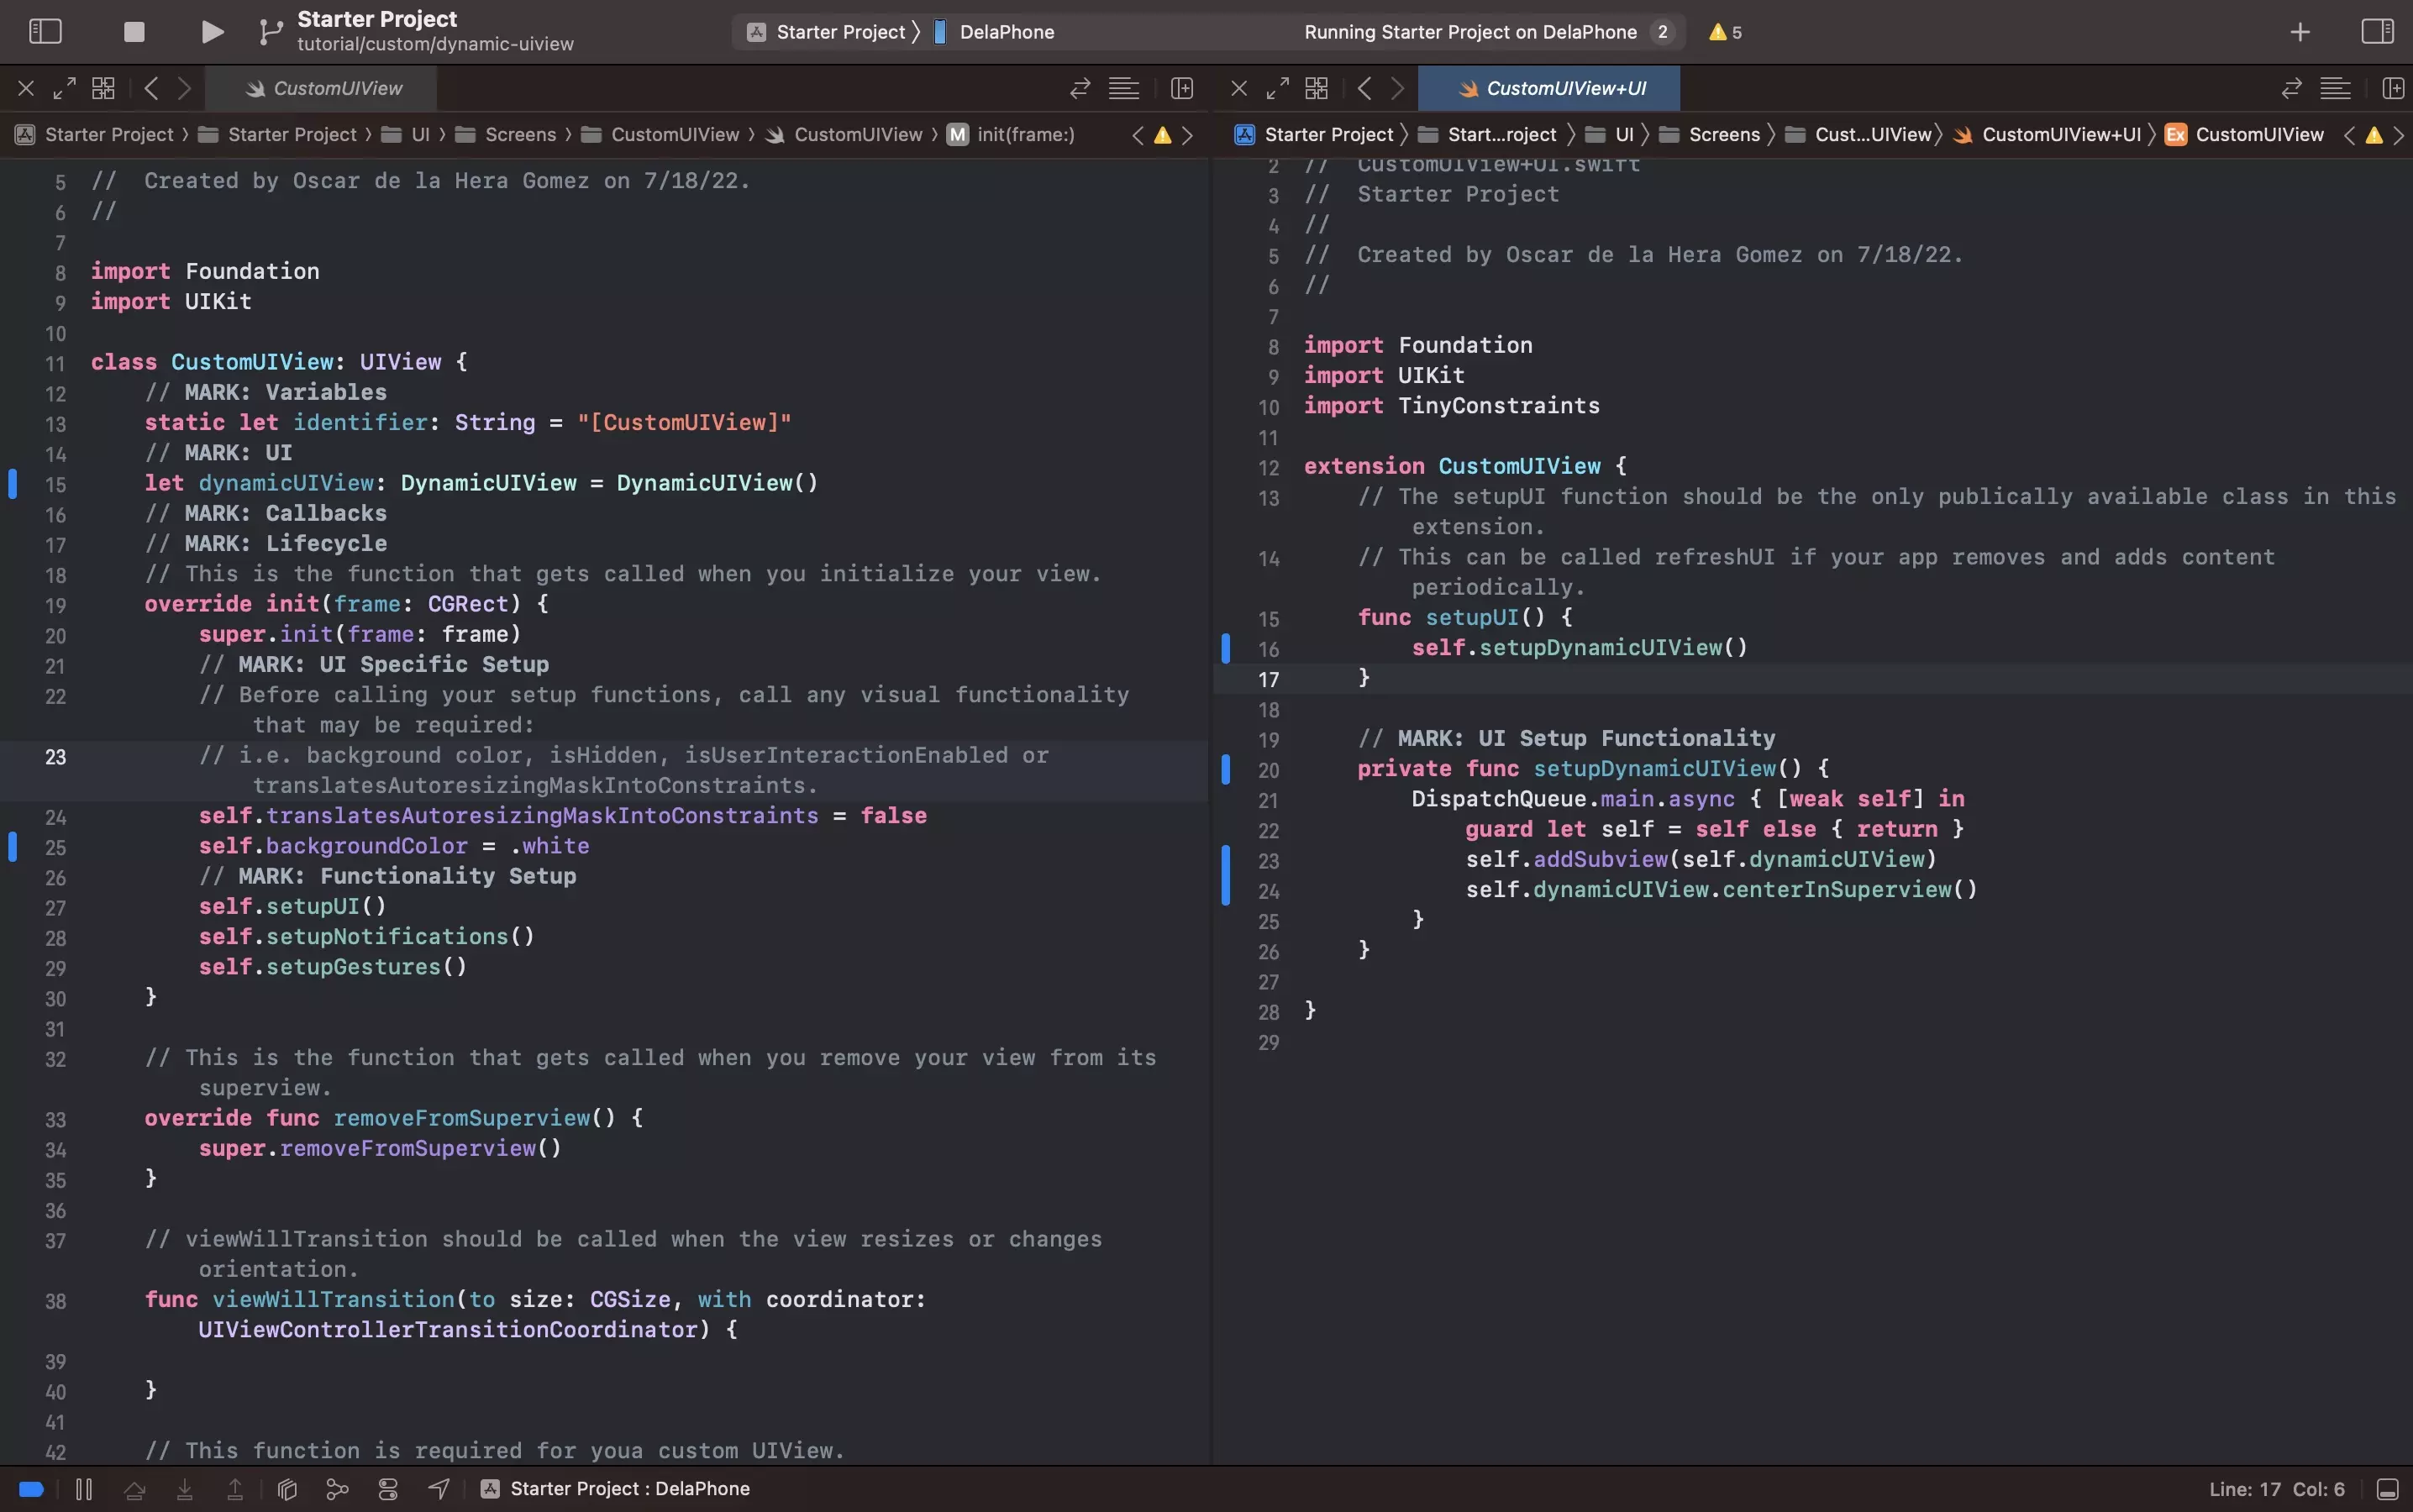 A screenshot of Xcode showing the code alterations that were made to the CustomUIVIew.swift and CustomUIVIew+UI.swift extensions.